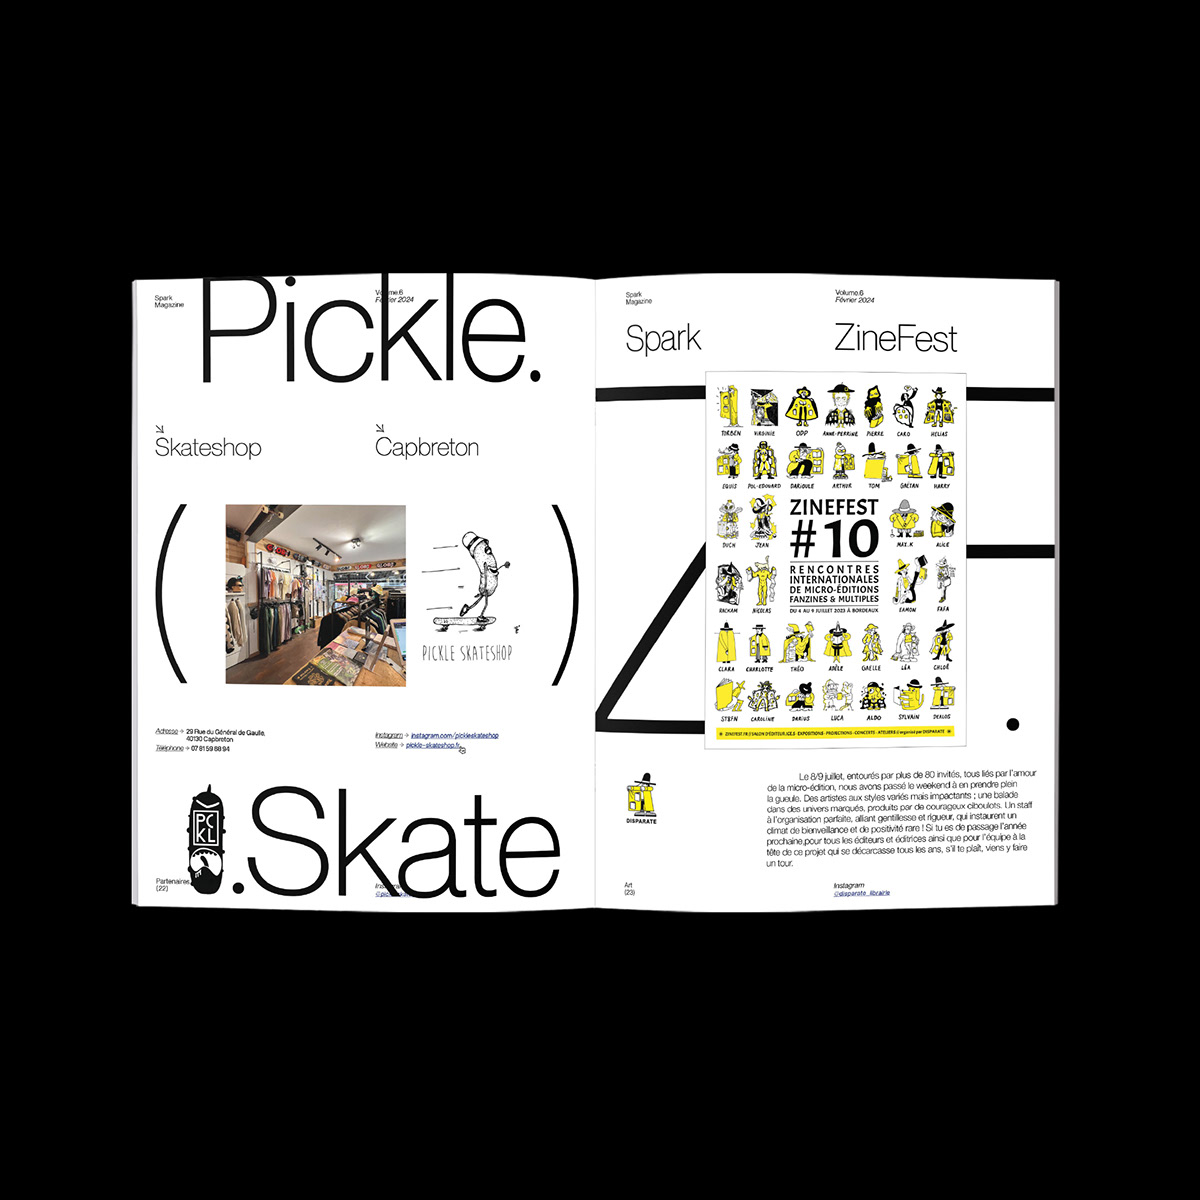 image from the Skate Art Merges in SPARK's Editorial Design and Graphic Design Showcase article on Abduzeedo